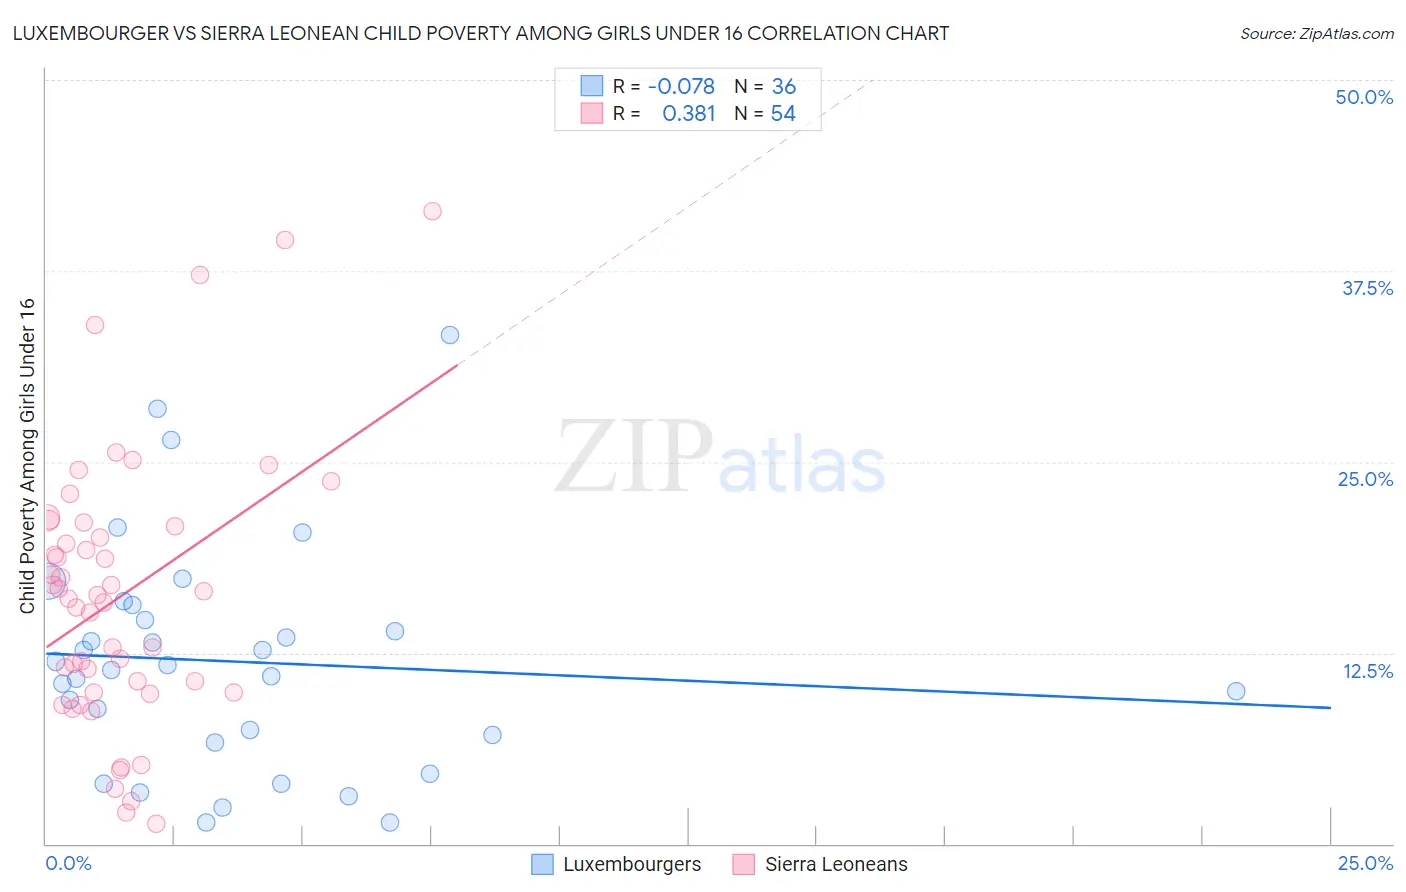 Luxembourger vs Sierra Leonean Child Poverty Among Girls Under 16